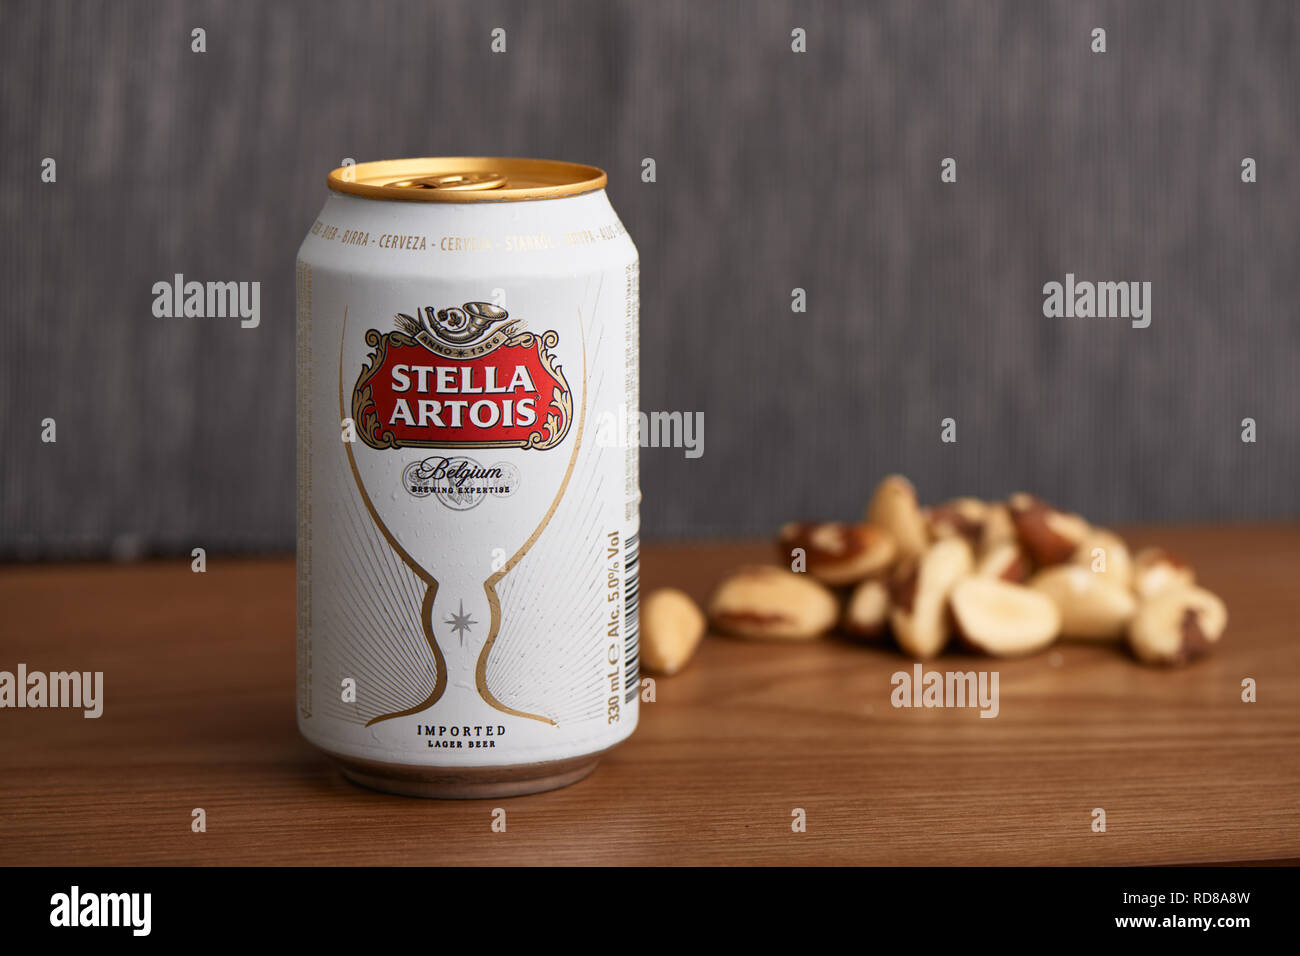 Gimpo, Korea - September 7, 2018: Stella Artois can, Belgian pilsner, on a wooden table with some Brazil nuts. Stock Photo